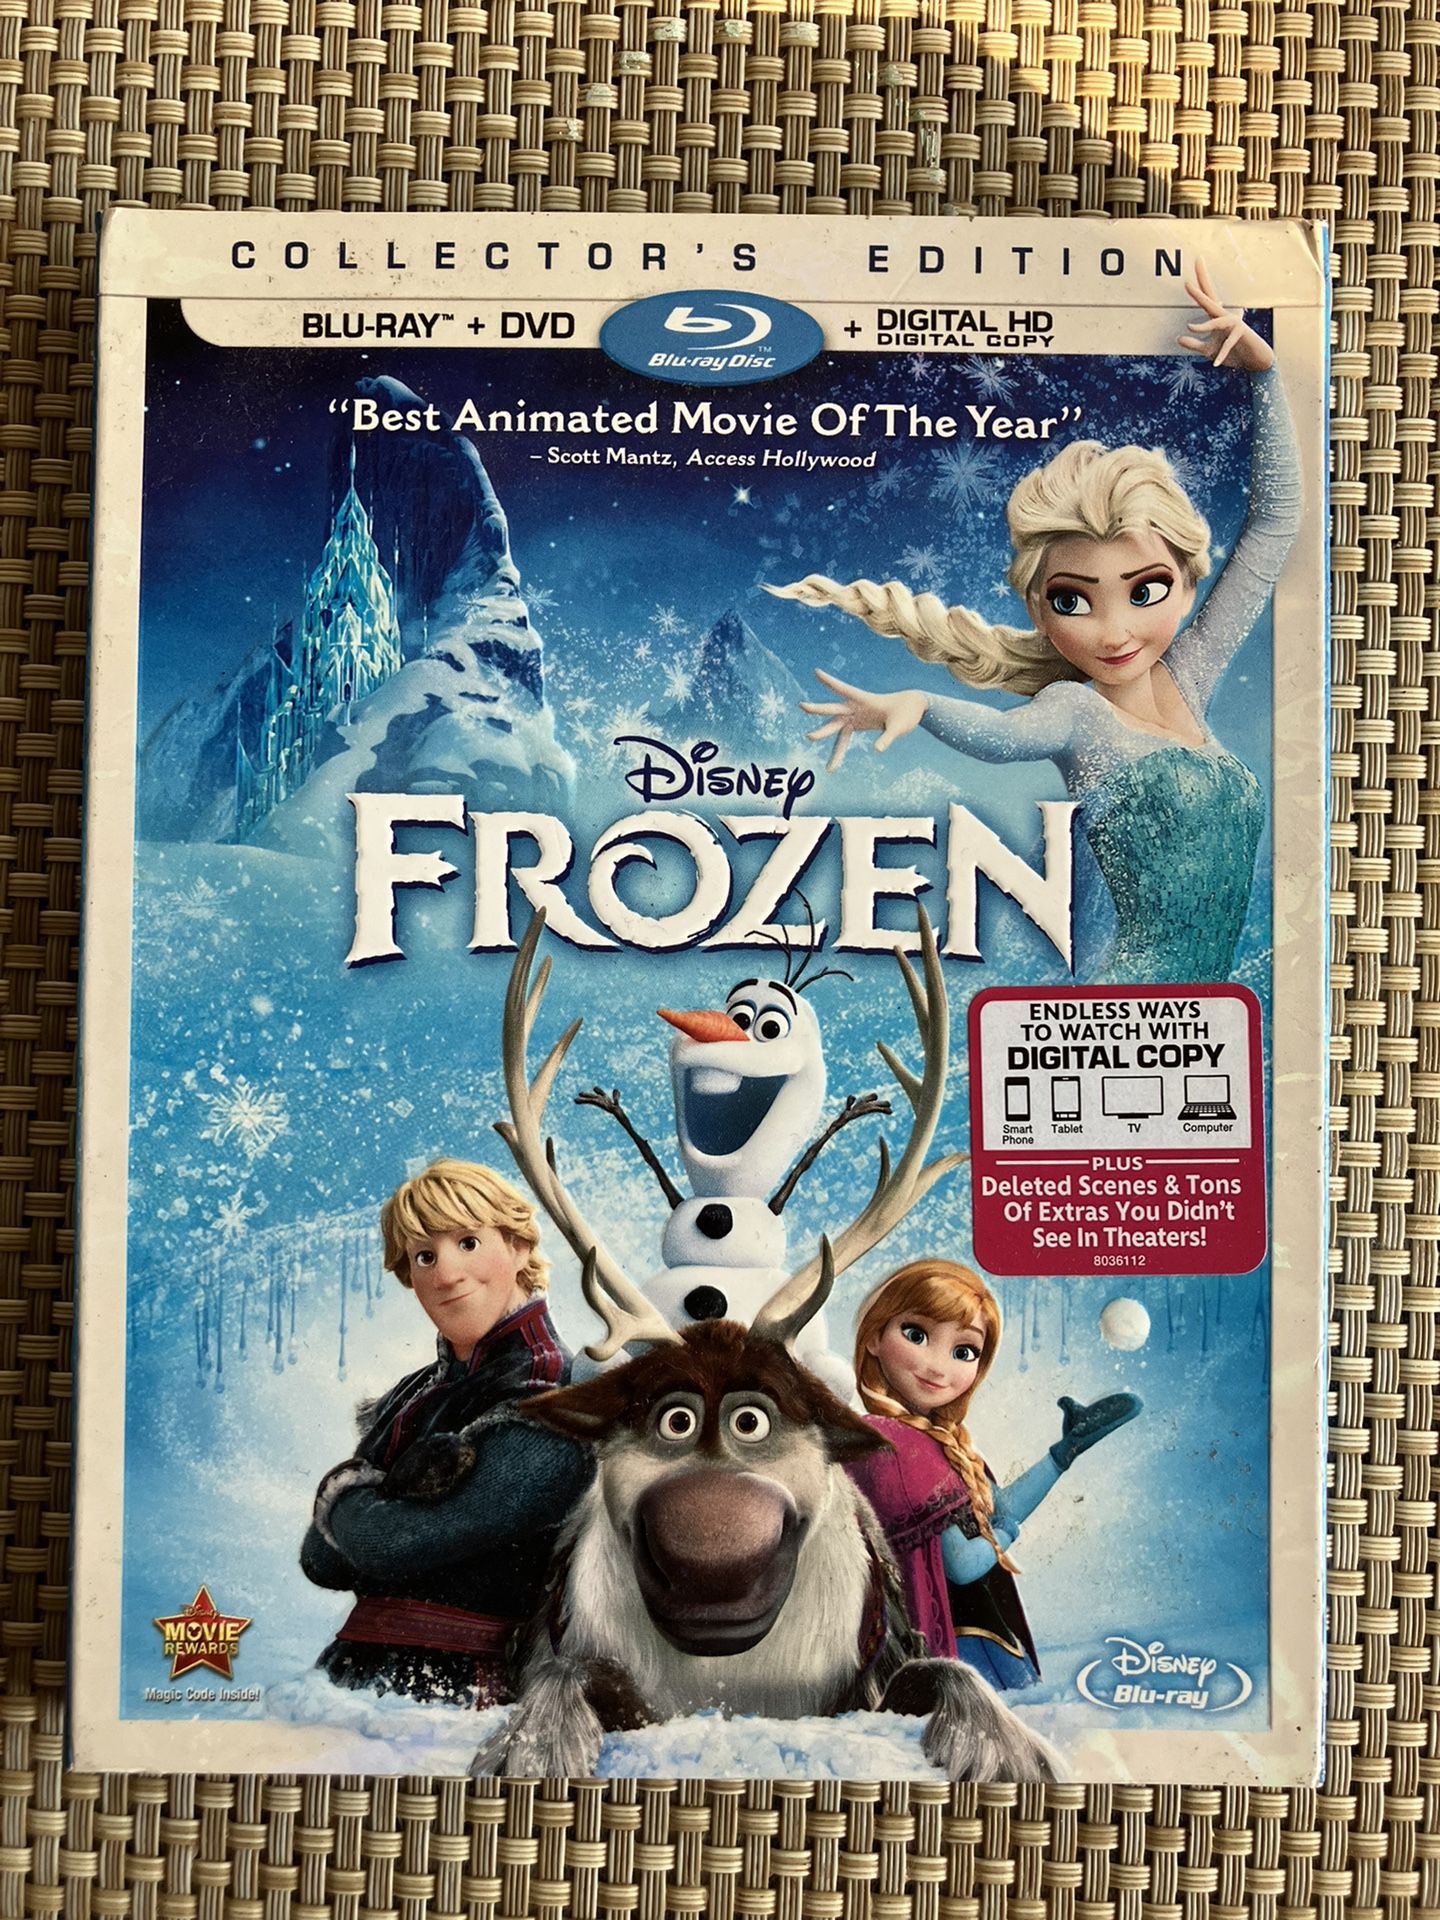 Collection of Blu-ray Disney Films